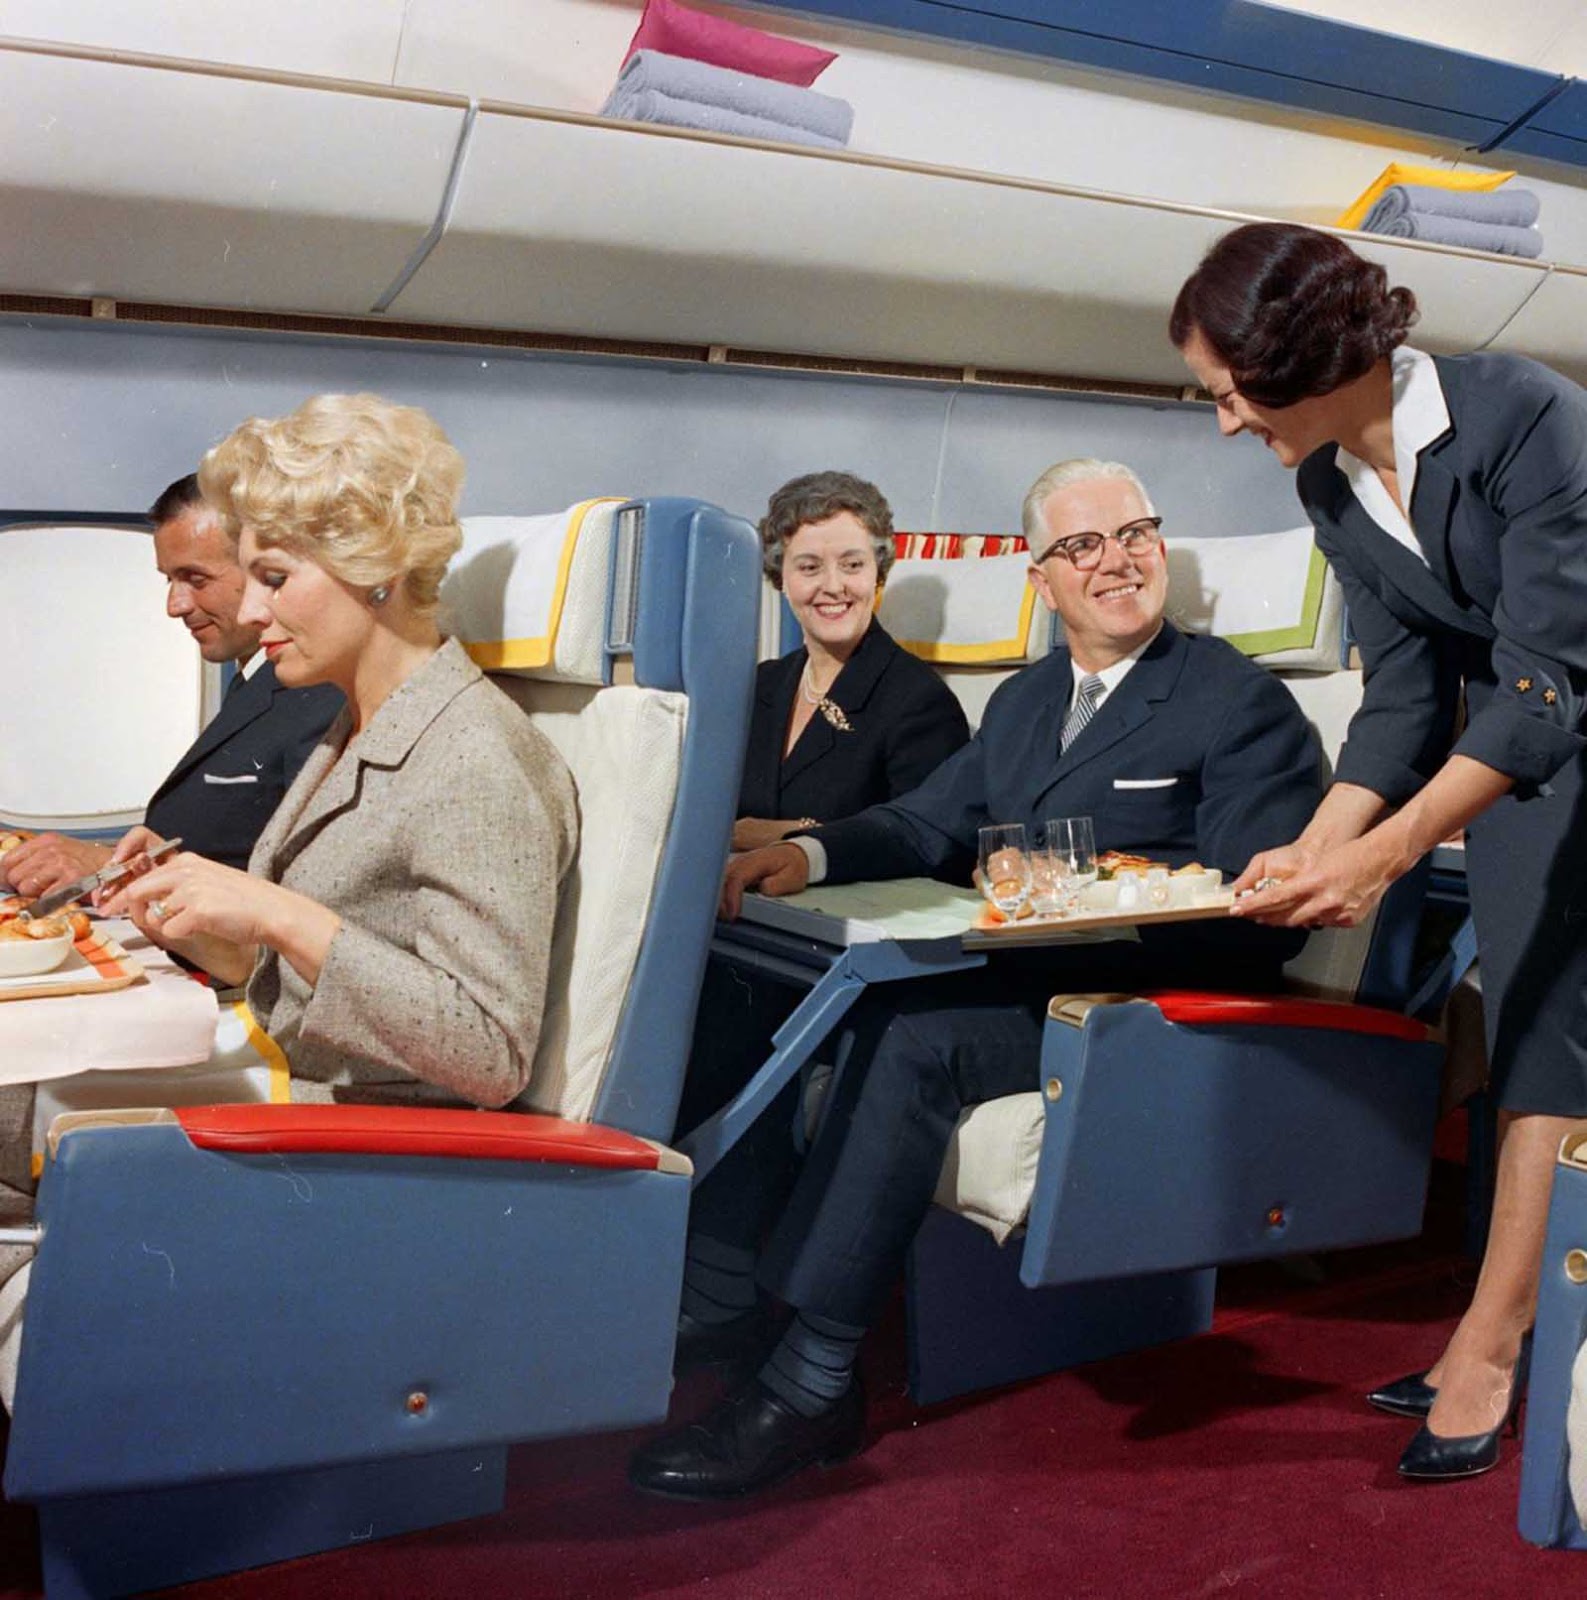 the flight attendants had to show a combination of look social manners and waitresses skills